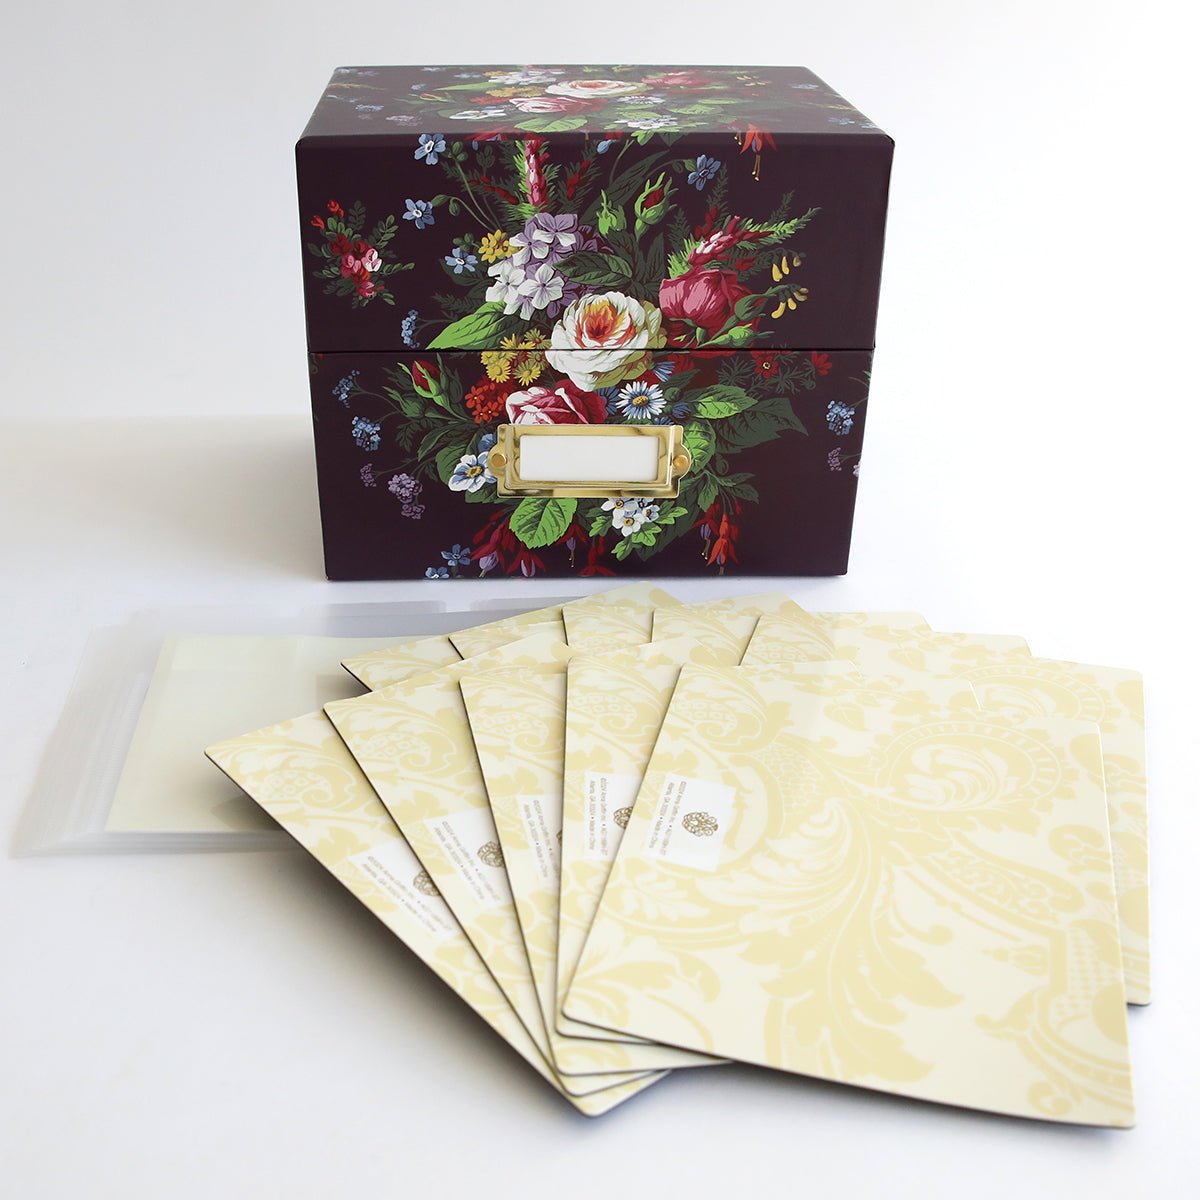 A beautiful set of floral cards in an Anna Griffin design, neatly stored in a Die Storage Box - Astrid Floral Pattern.